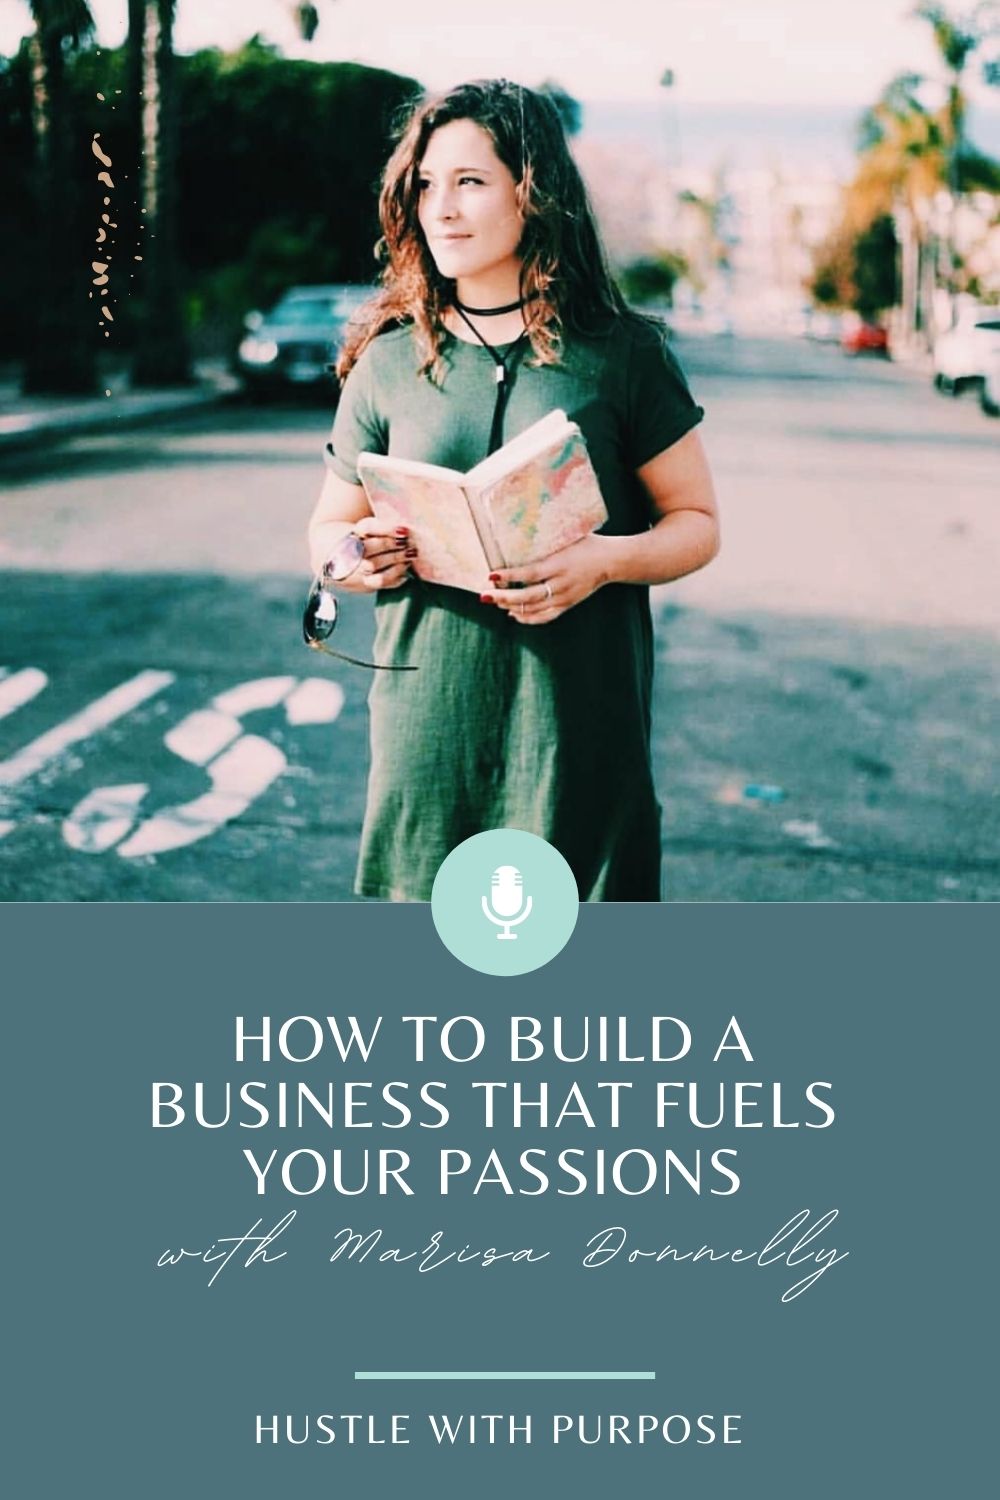 How to Build a Business that Fuels Your Passions